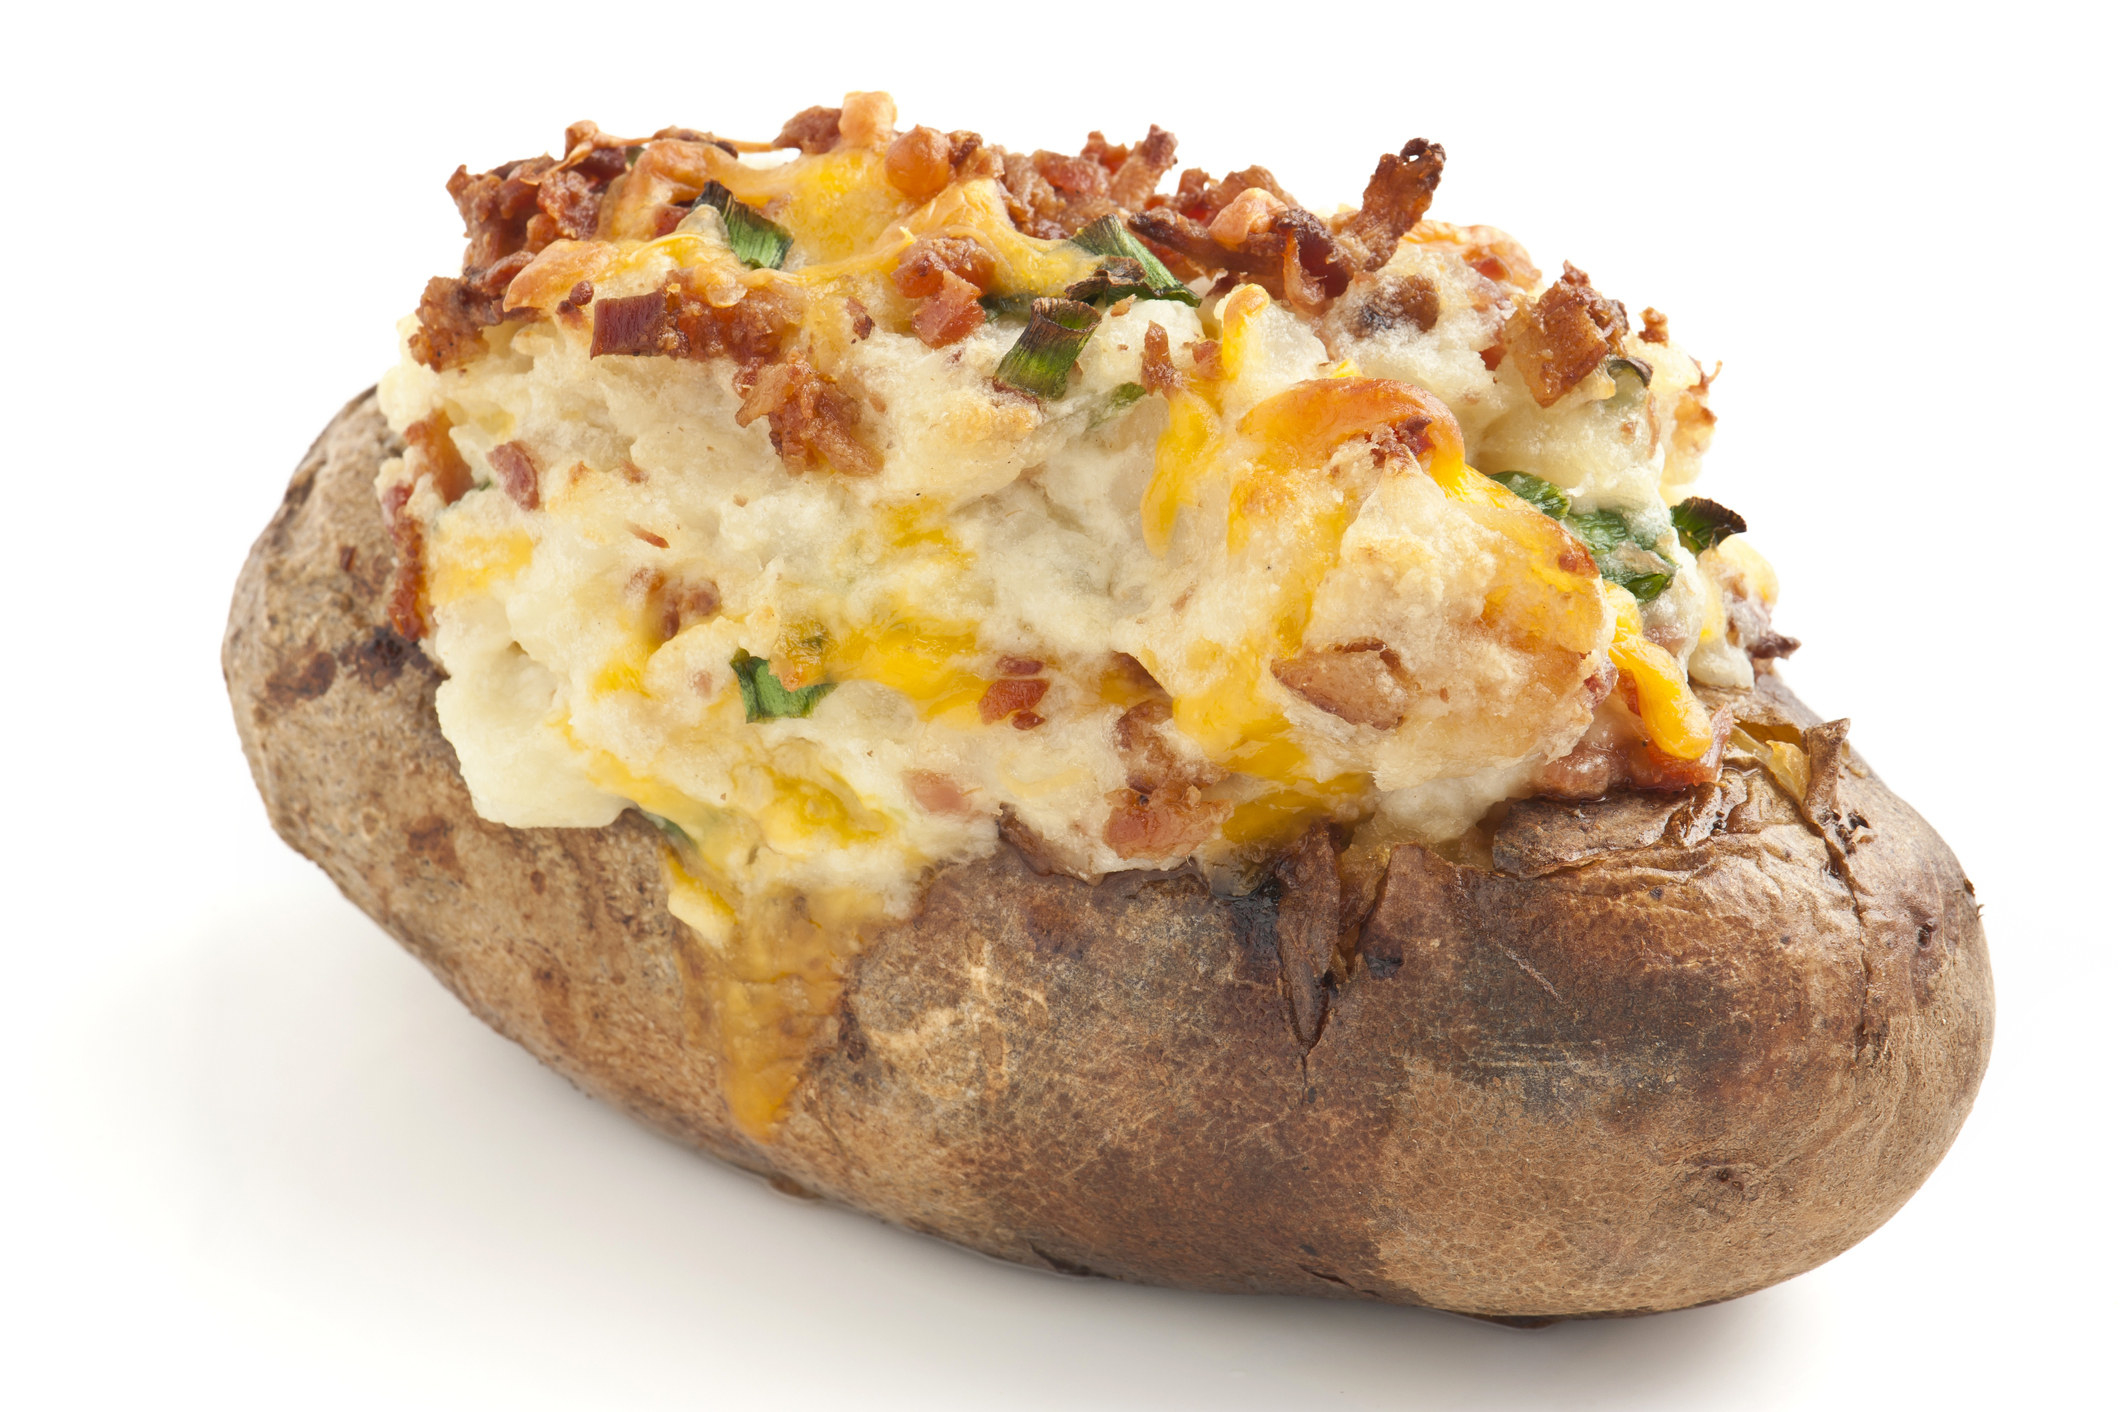 Baked potato with various toppings, including bacon bits and cheese